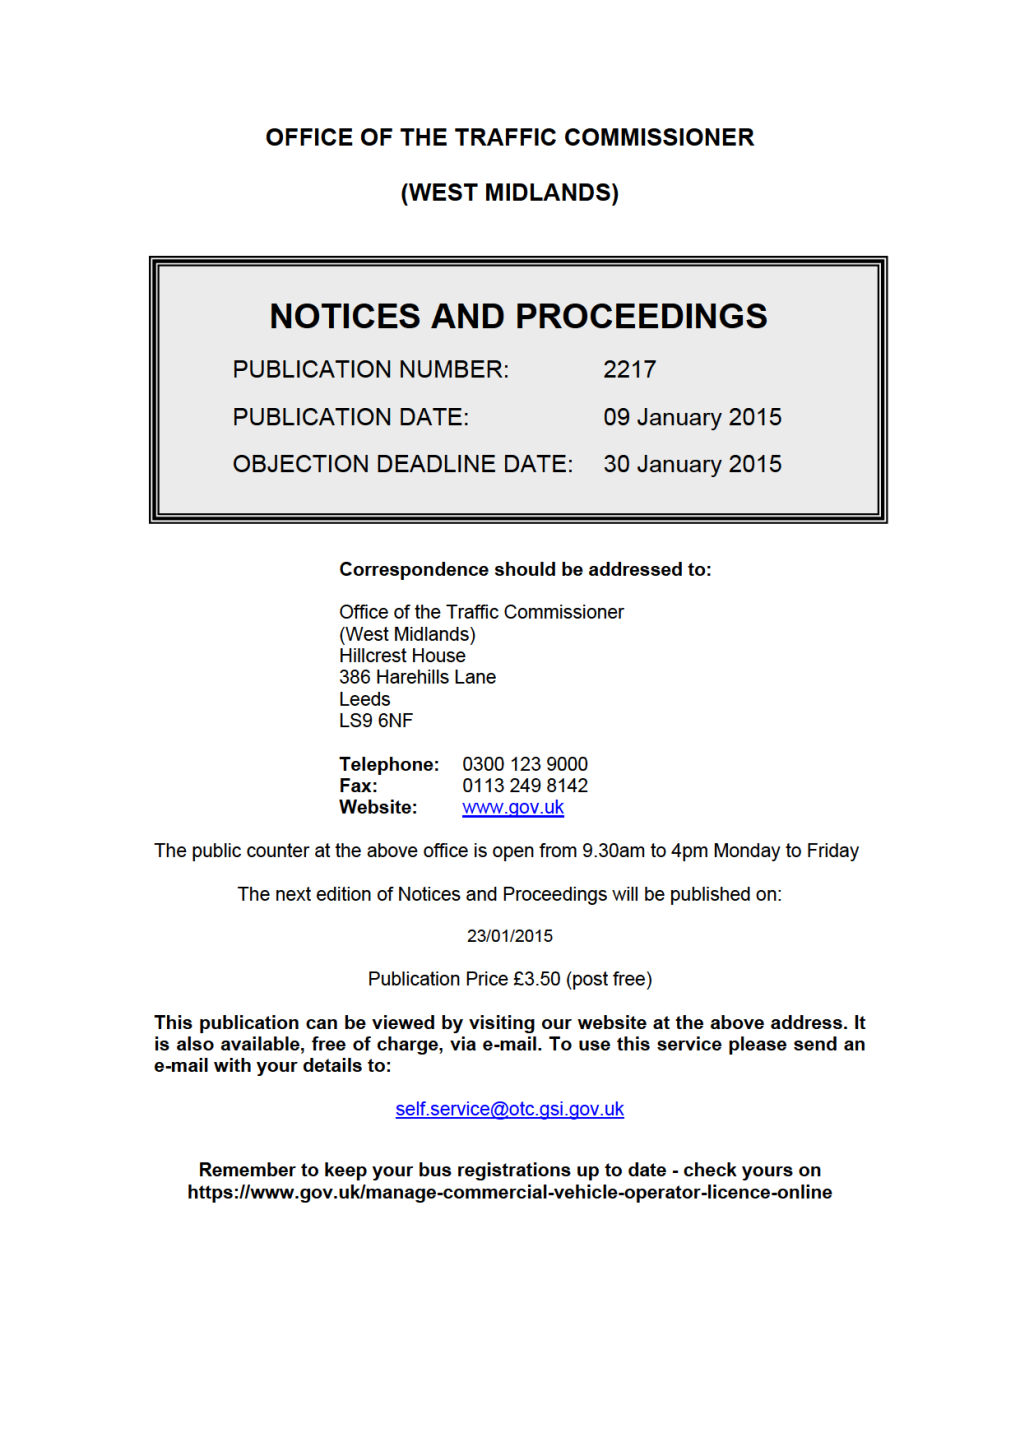 Notices and Proceedings for the Office of the Traffic Commissioner, West Midlands